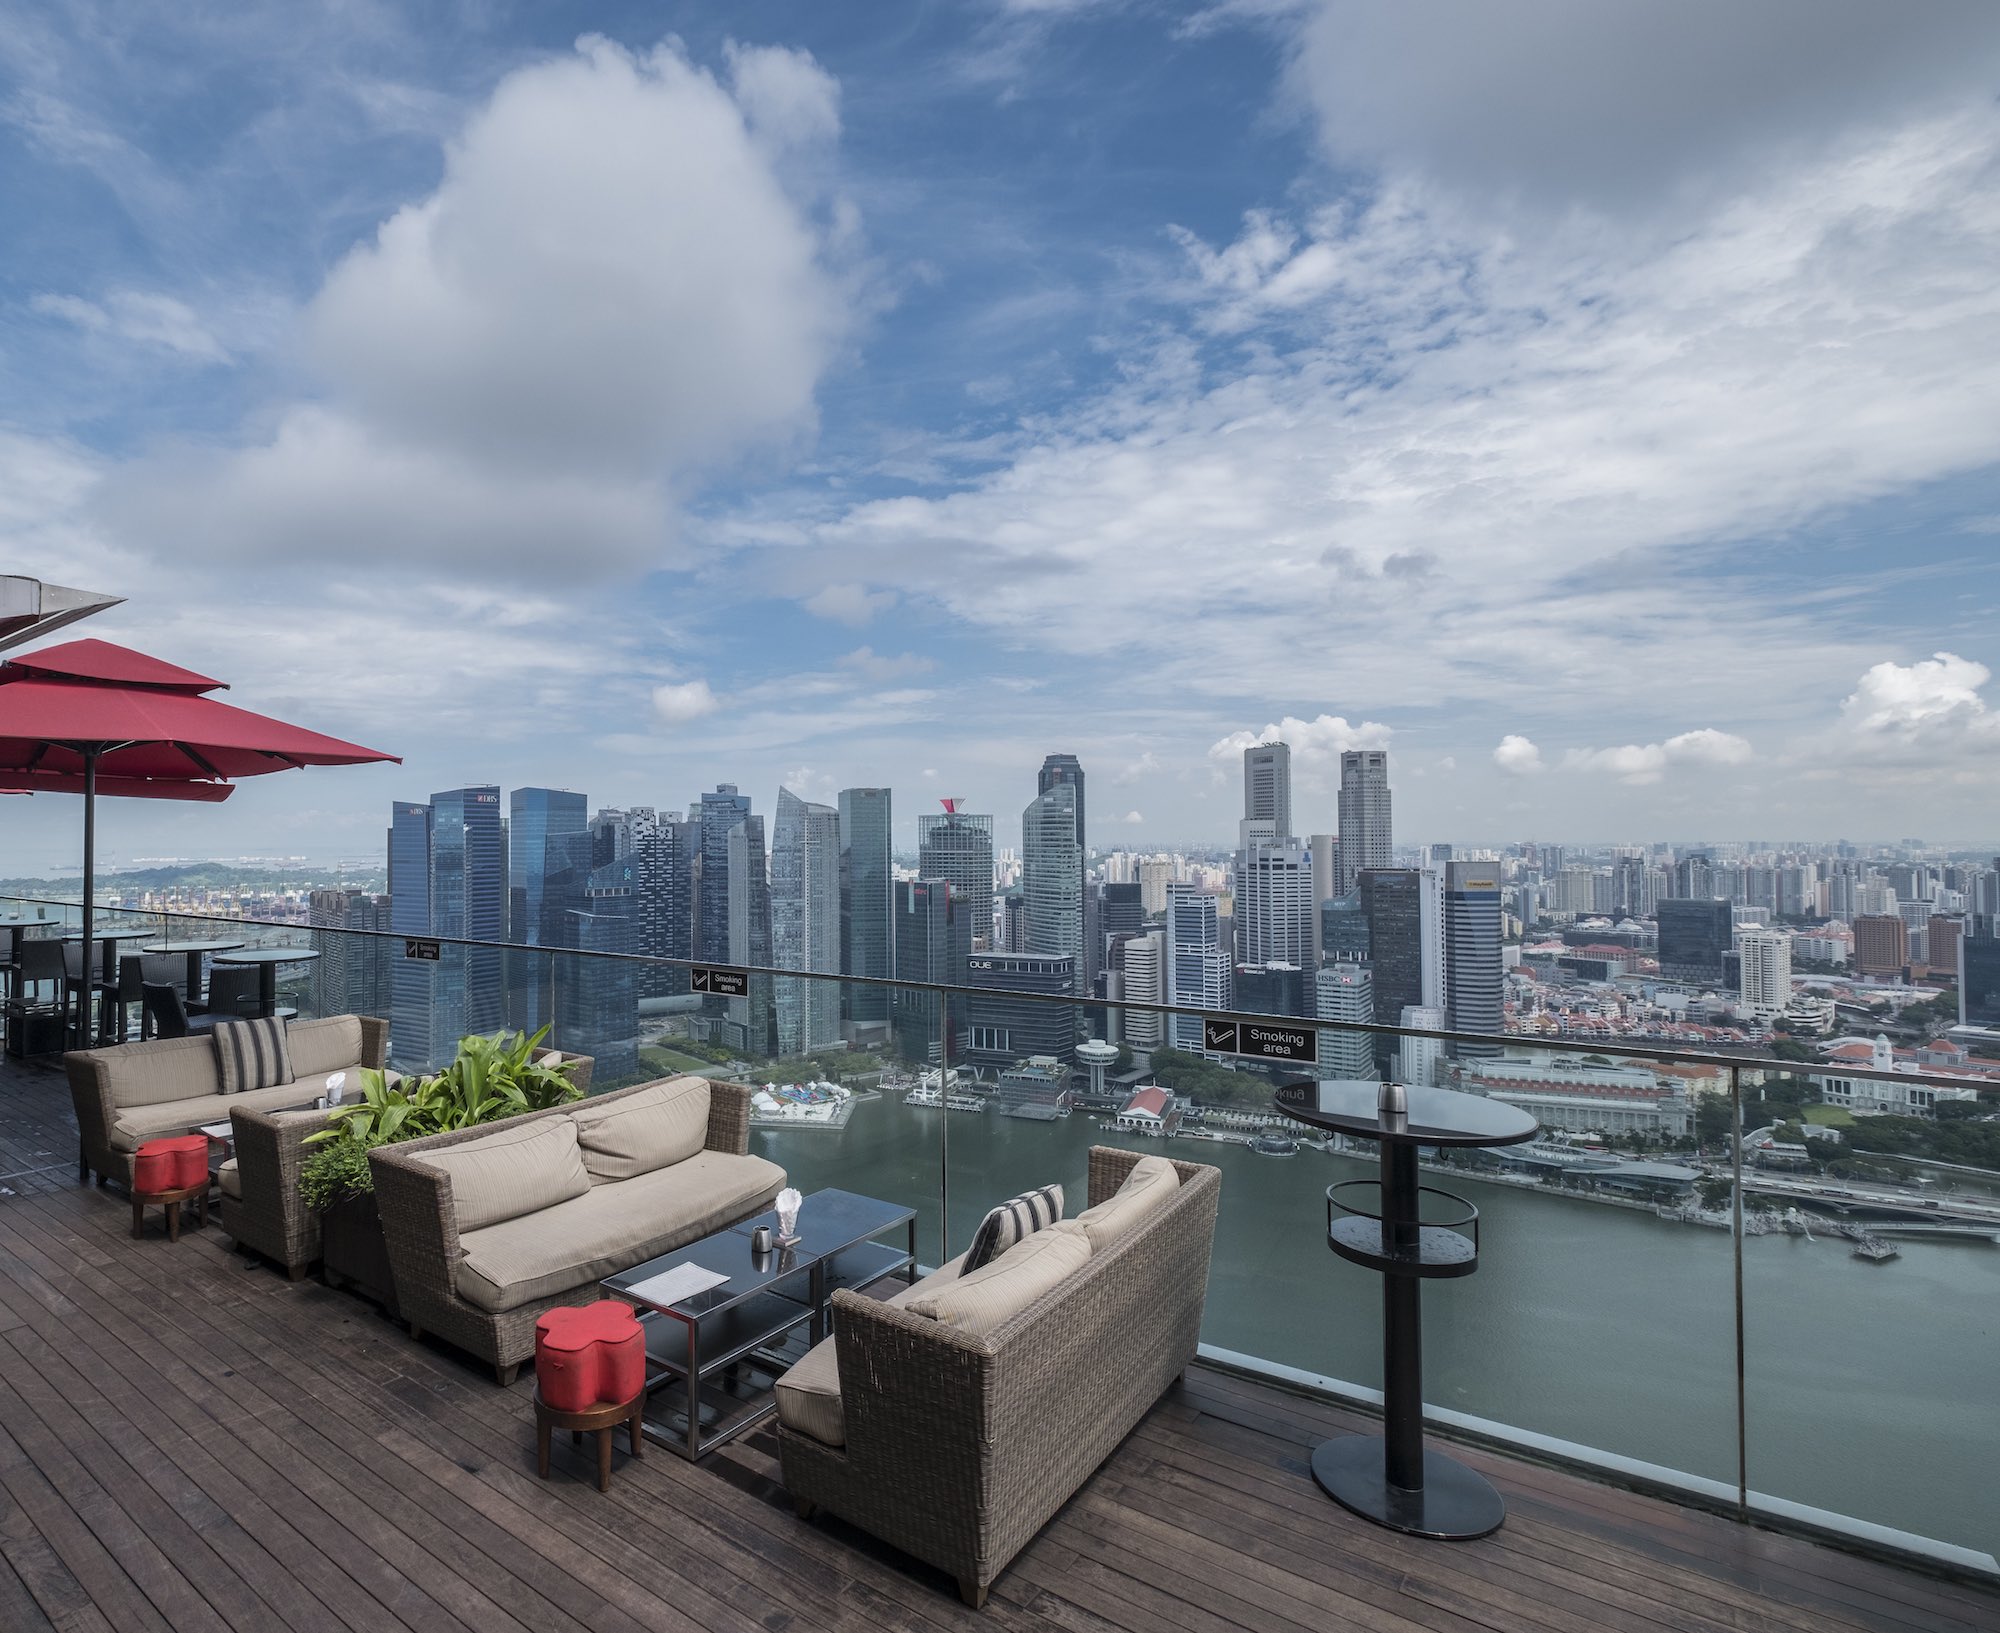 CE LA VI SG roof top Hospitality restaurant bar hotel Photography services singapore commercial 15